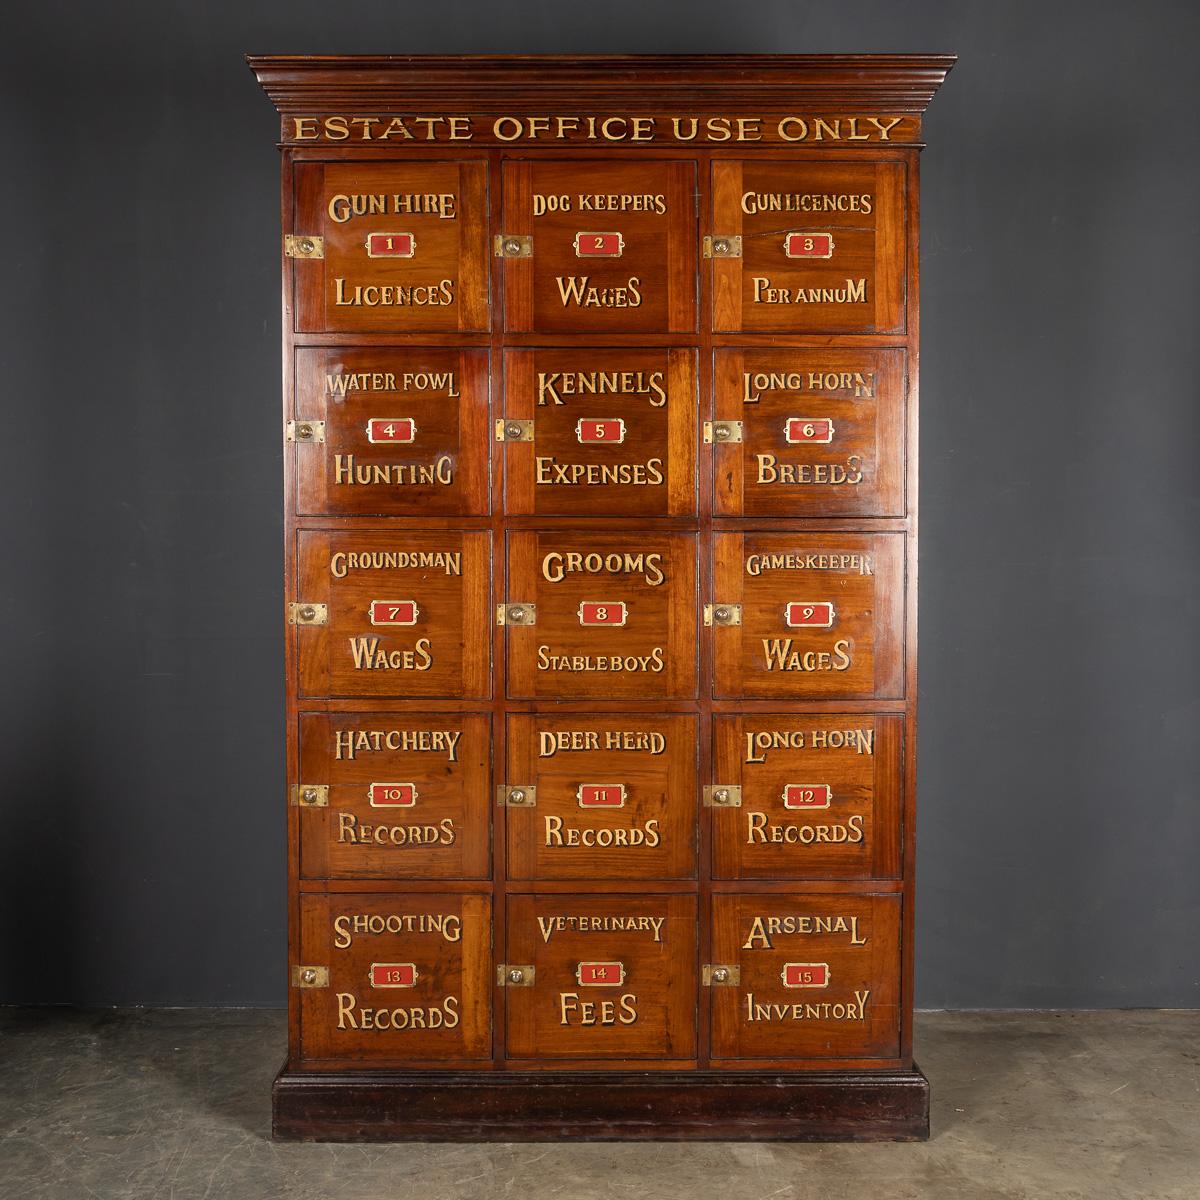 19th Century English Mahogany, multi-doored, large set of lockers, primarily would have been used as an estate cupboard, as the descriptions indicate.

CONDITION
In Great Condition - wear as expected.

SIZE
Width: 126cm
Depth: 46cm
Height: